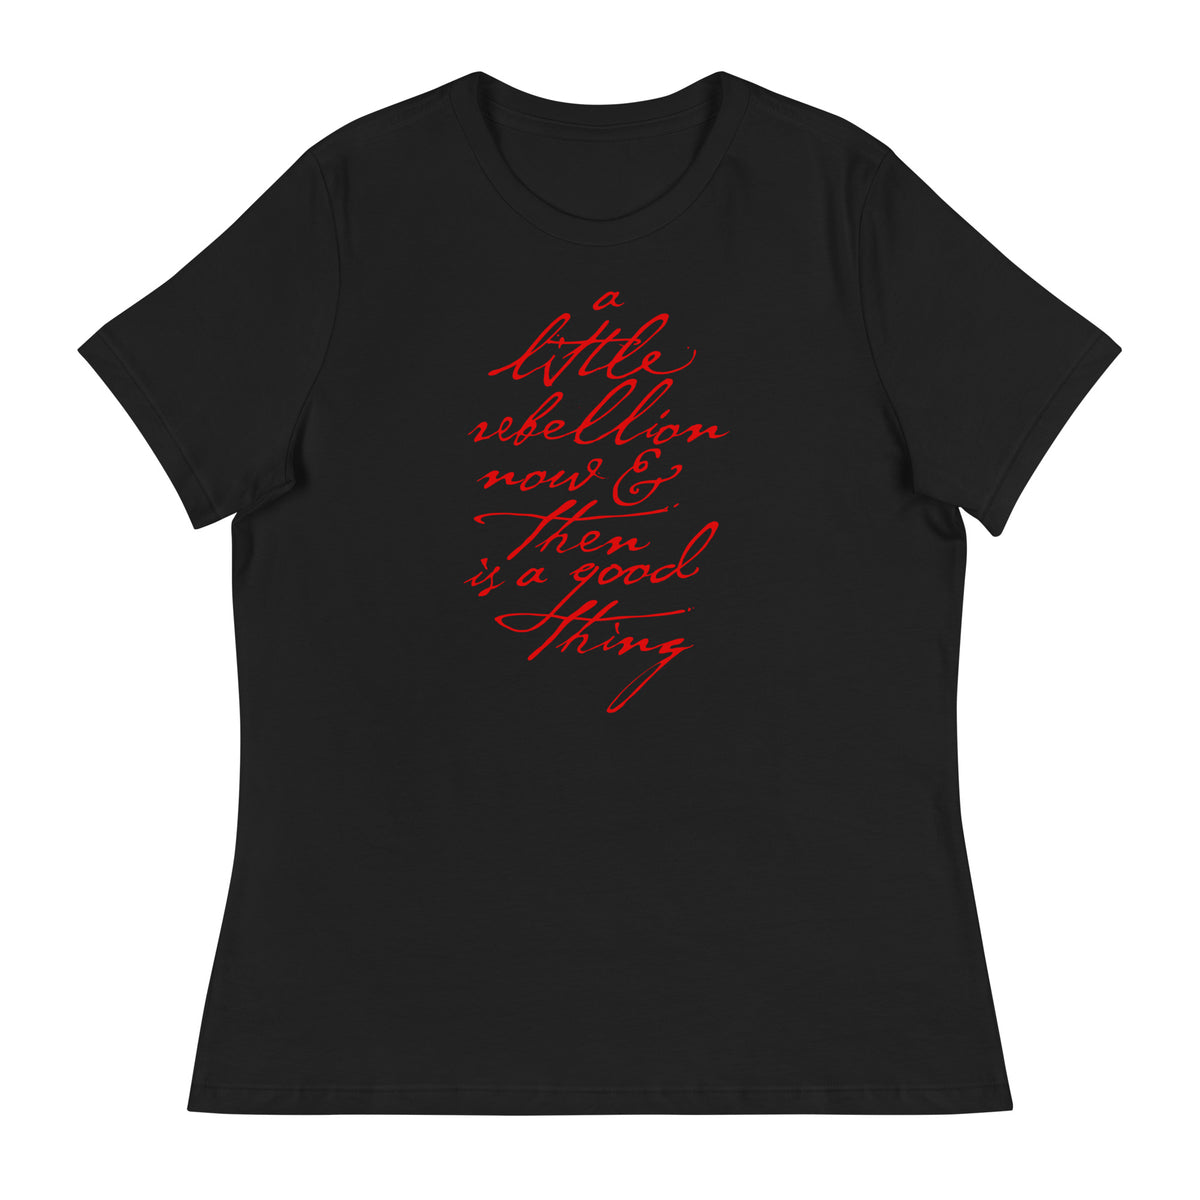 A Little Rebellion Now And Then Ladies T-Shirt